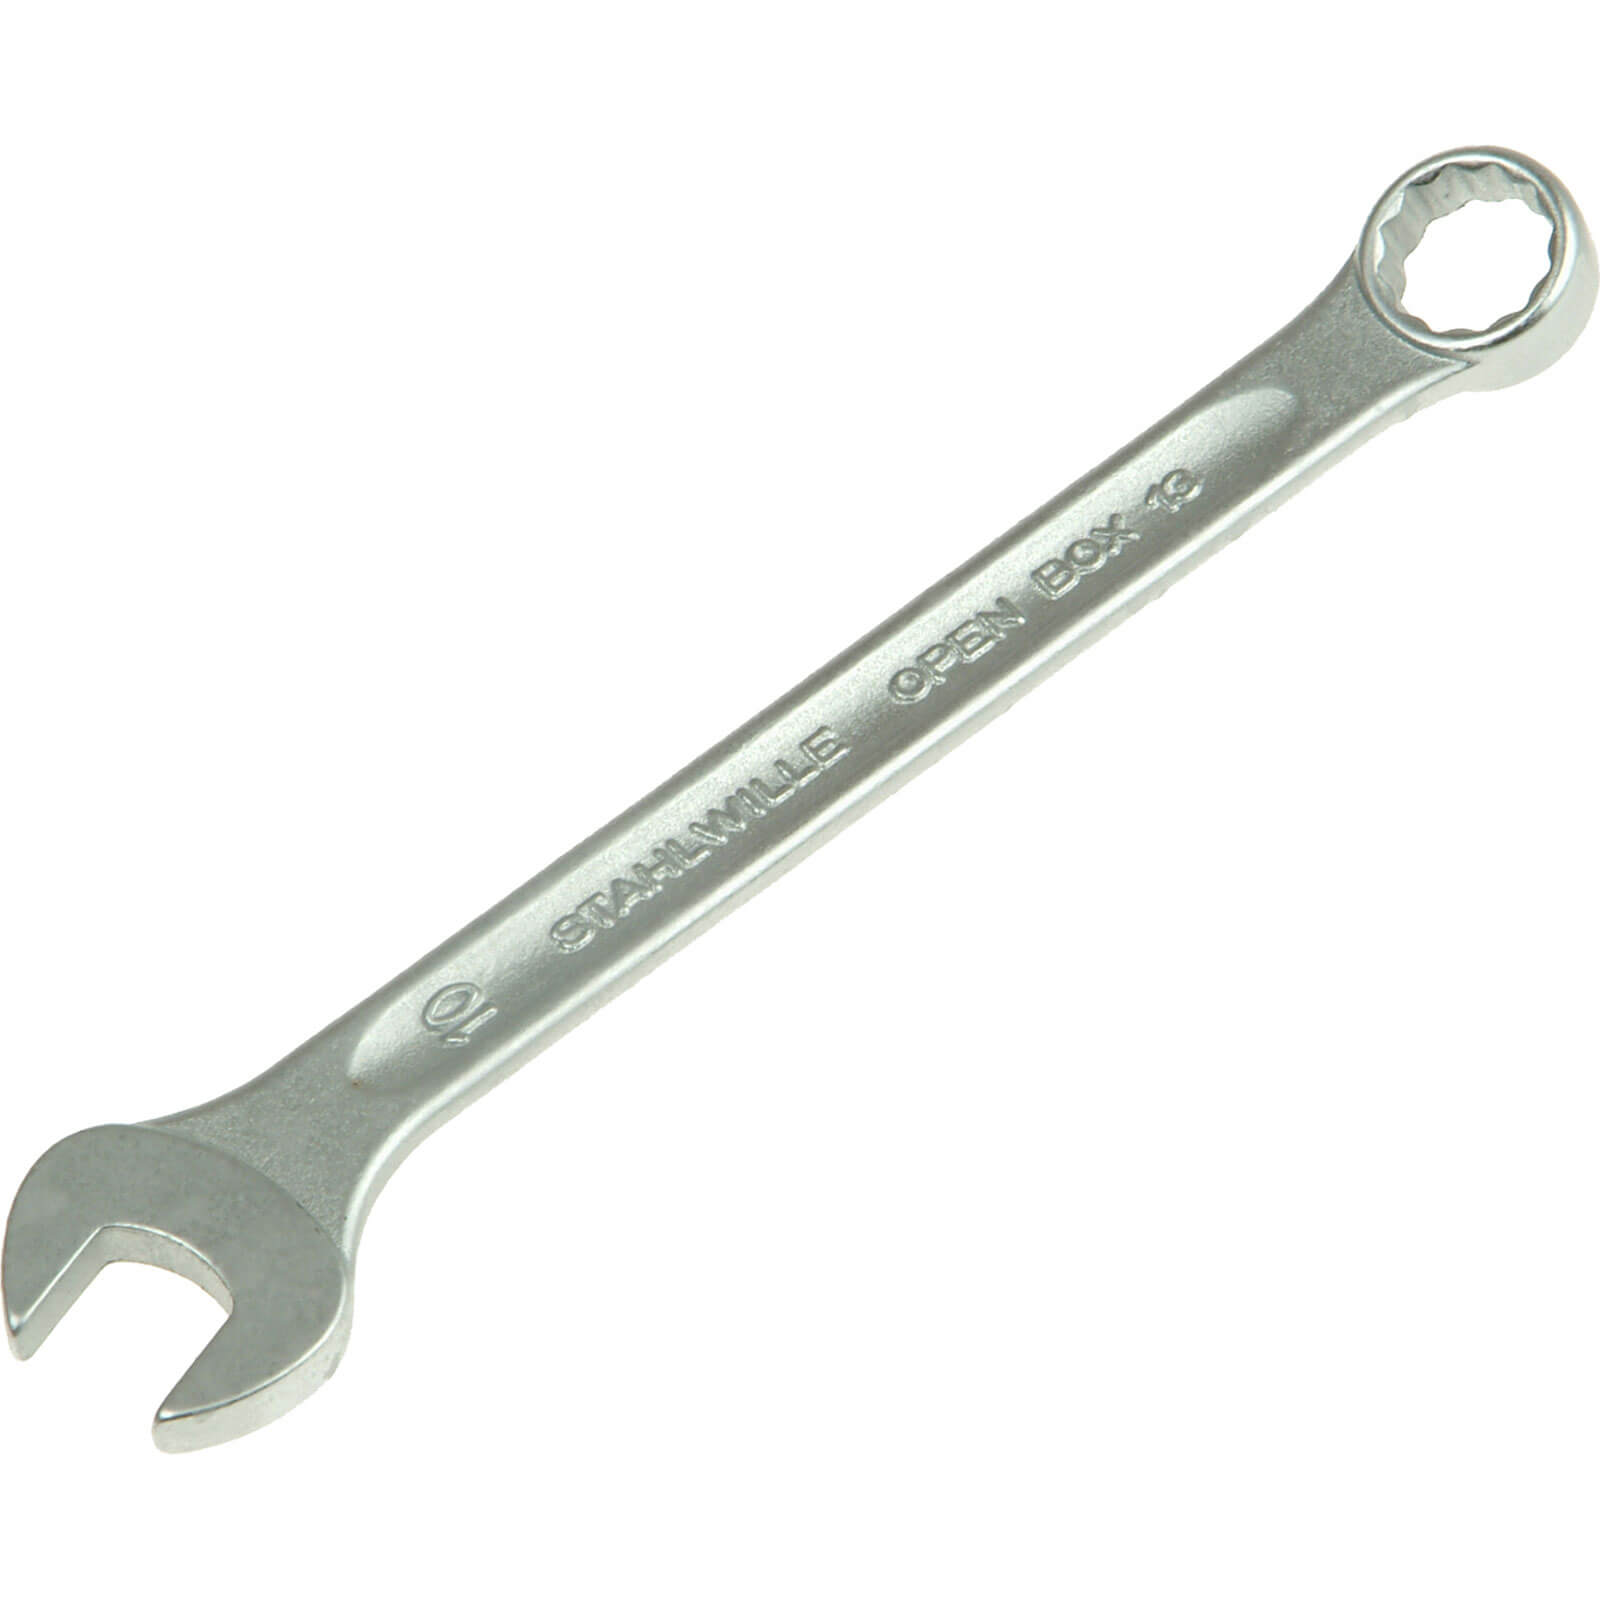 STAHLWILLE 17 RATCHET COMBINATION SPANNER WRENCH 9mm